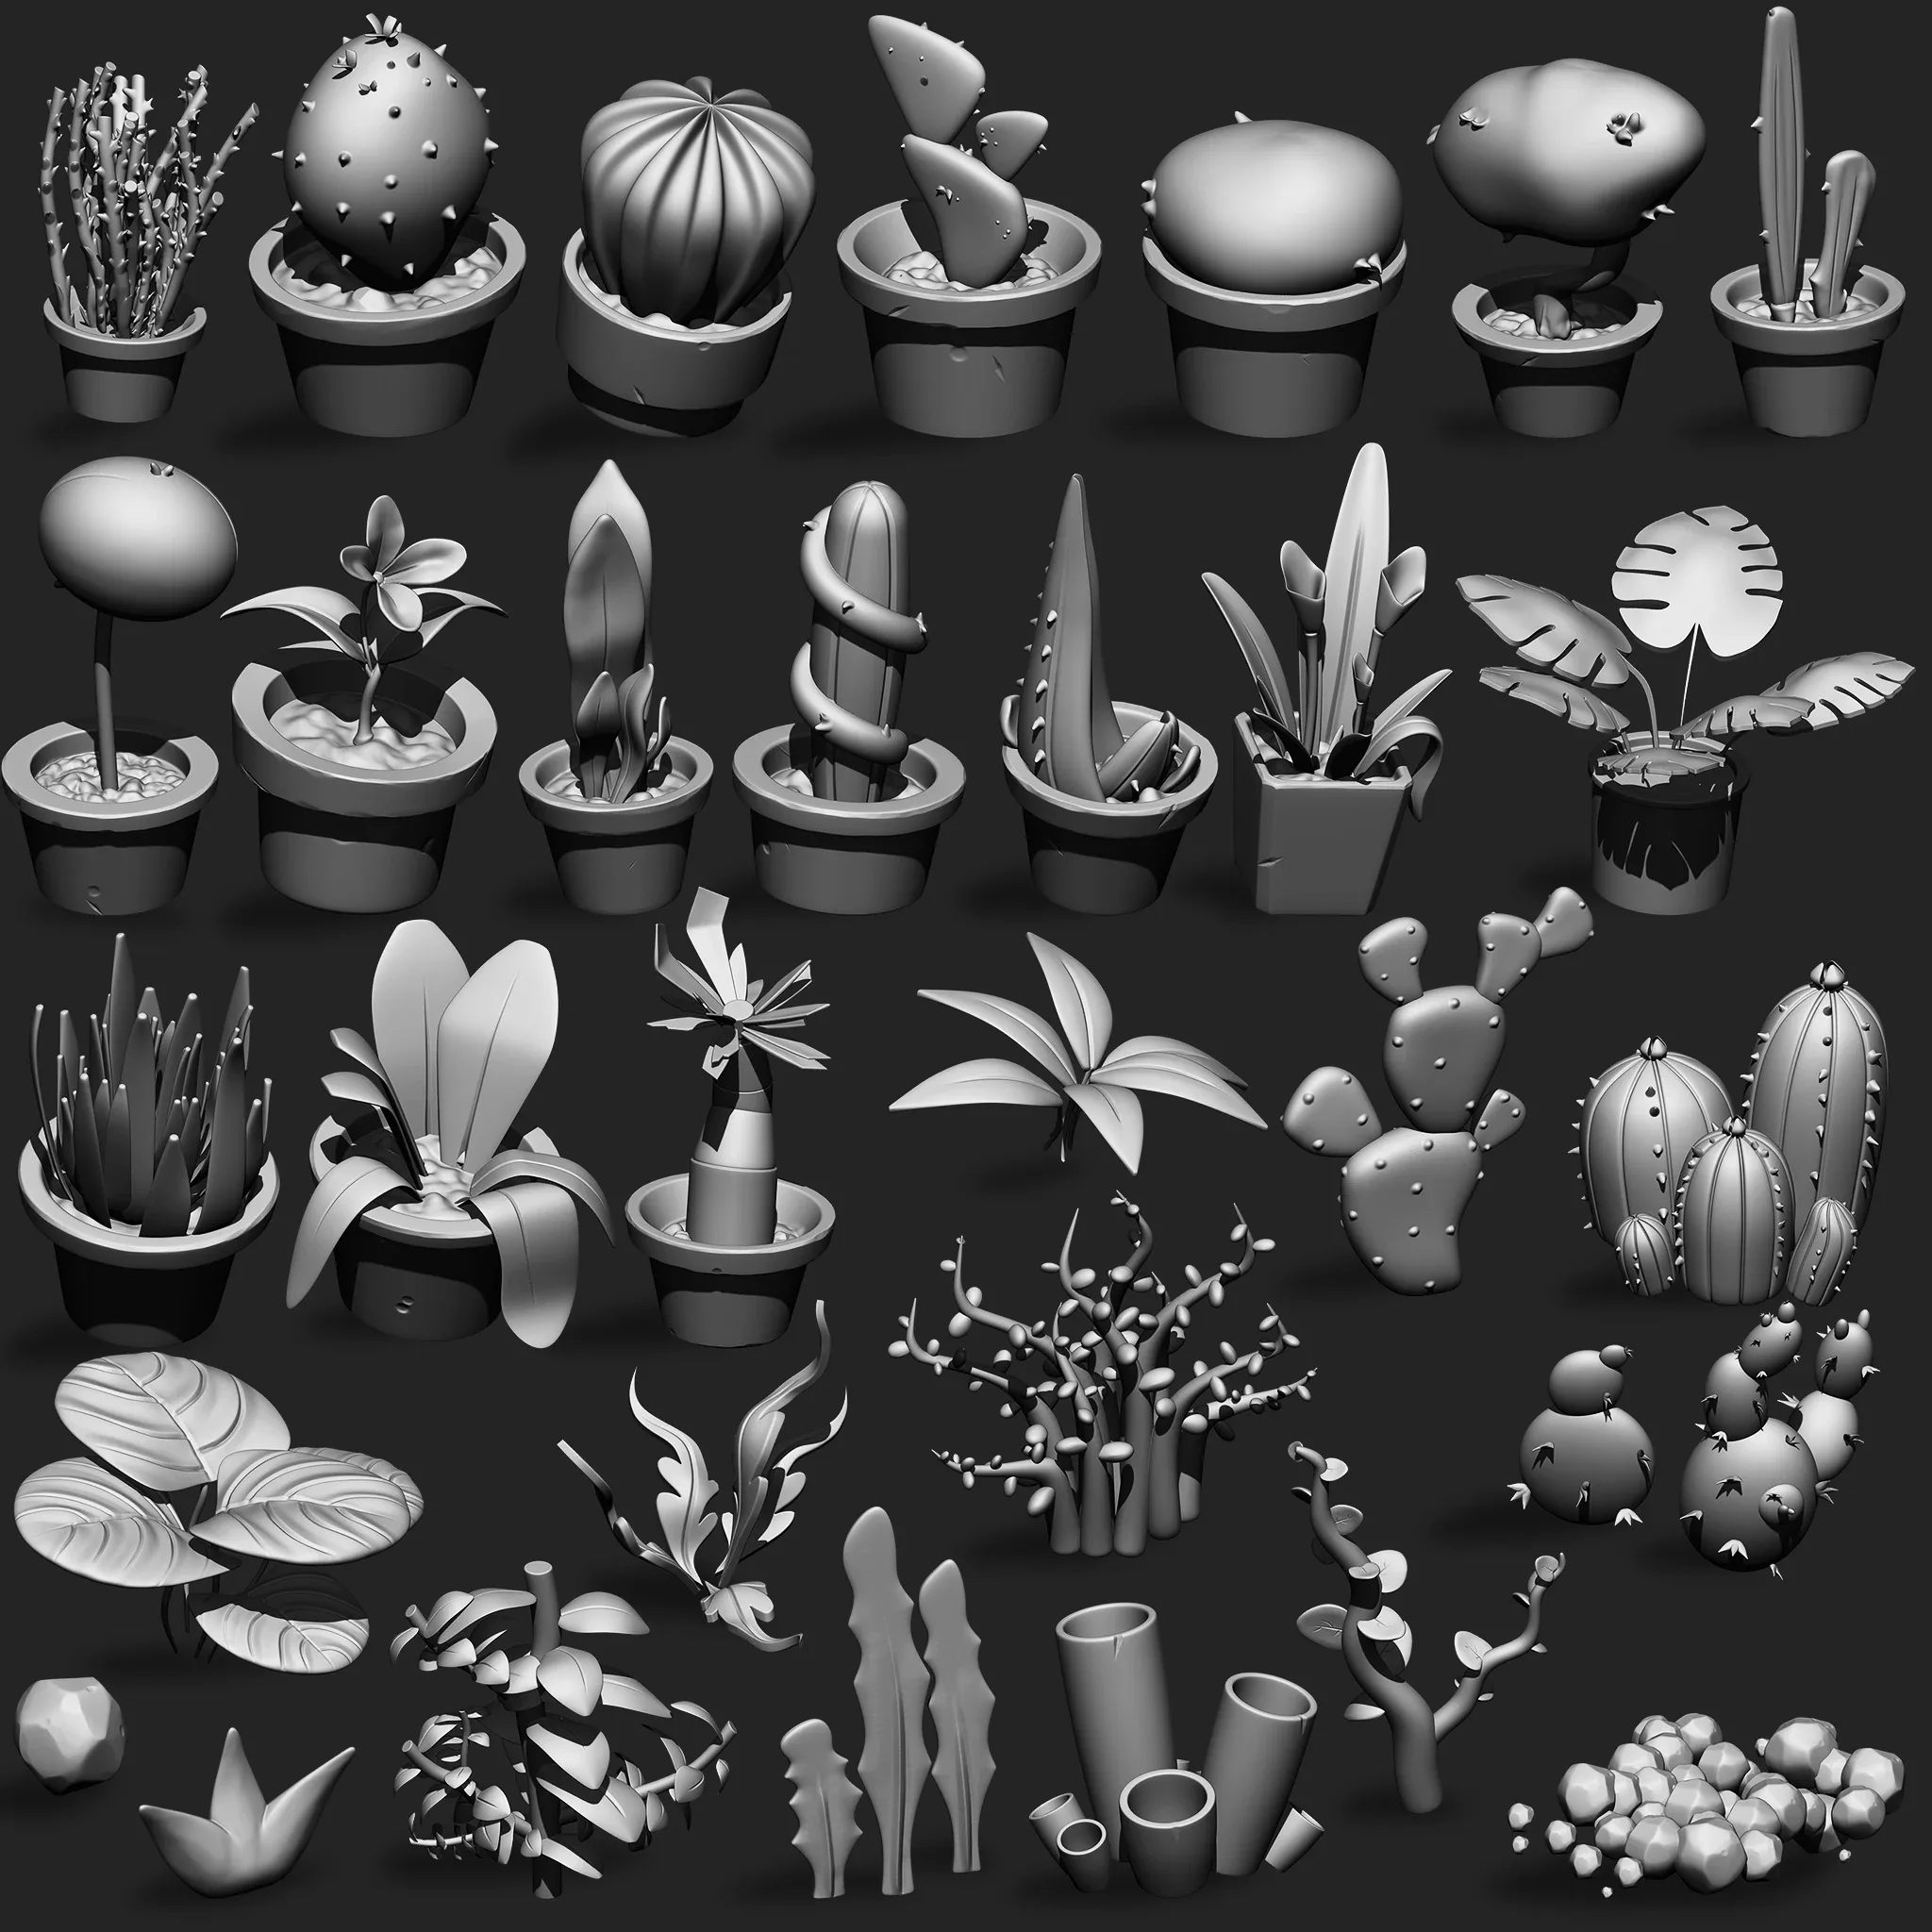 Stylized Plants IMM Brushes 31 in one